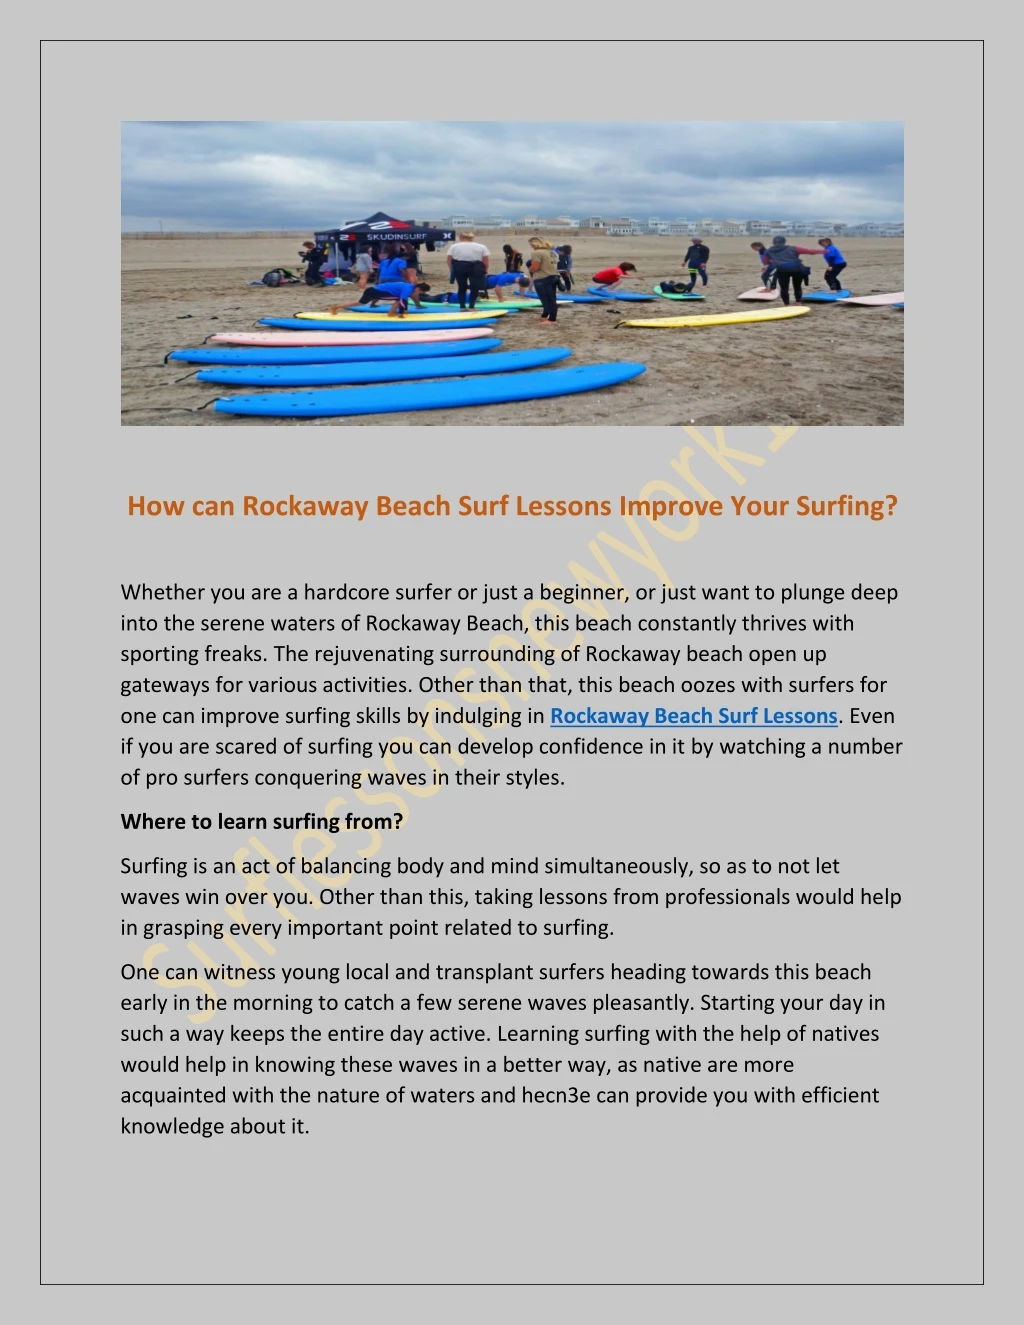 how can rockaway beach surf lessons improve your